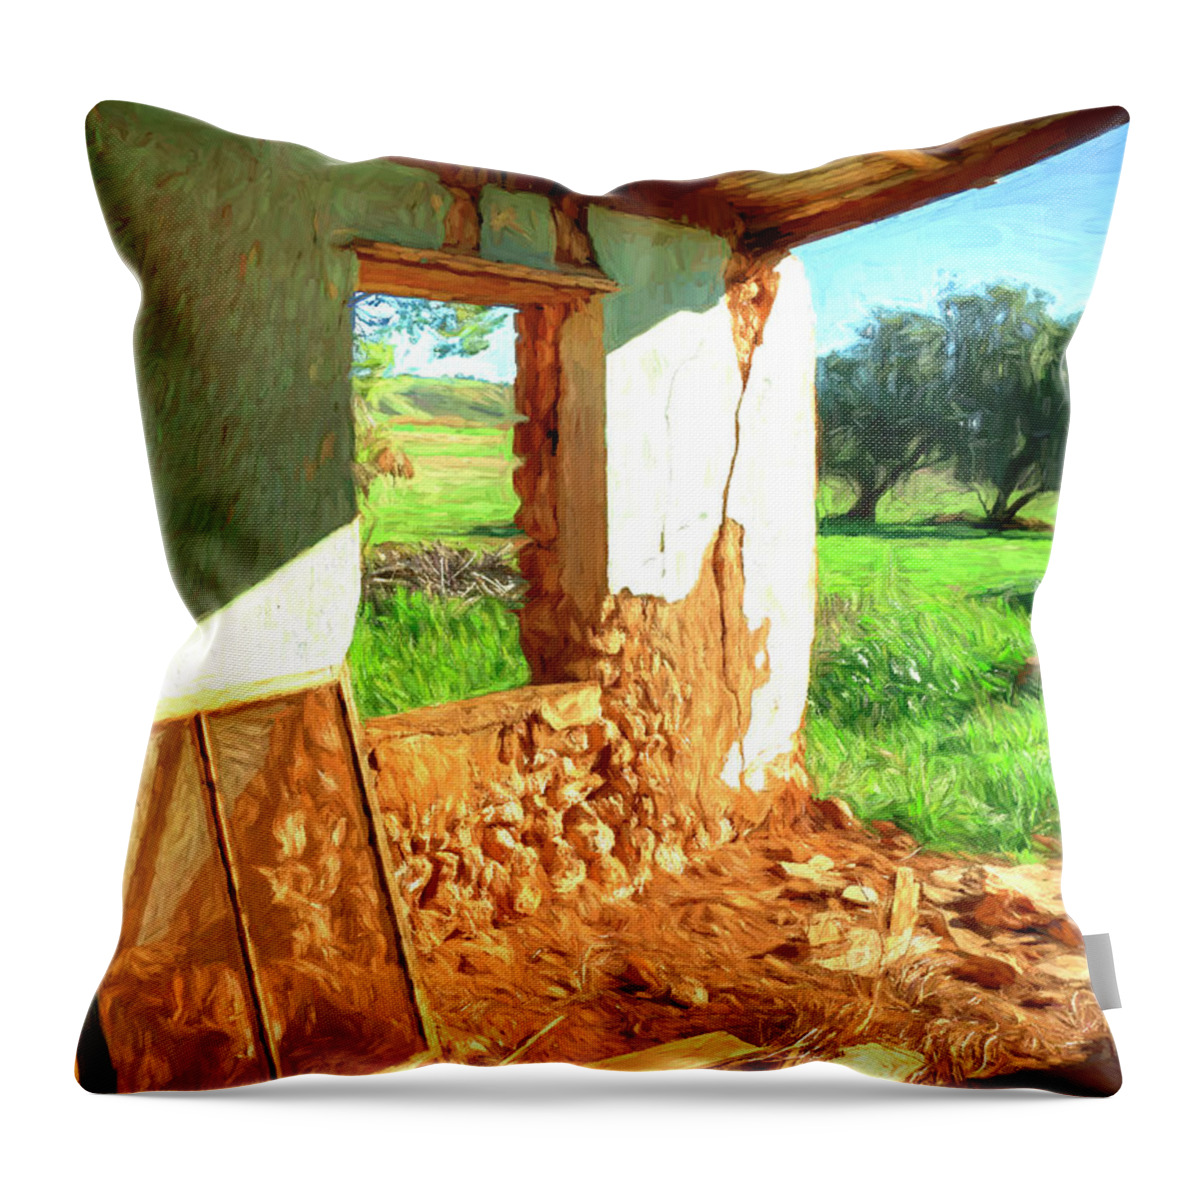 Abandoned Throw Pillow featuring the digital art Room With A View by Wayne Sherriff